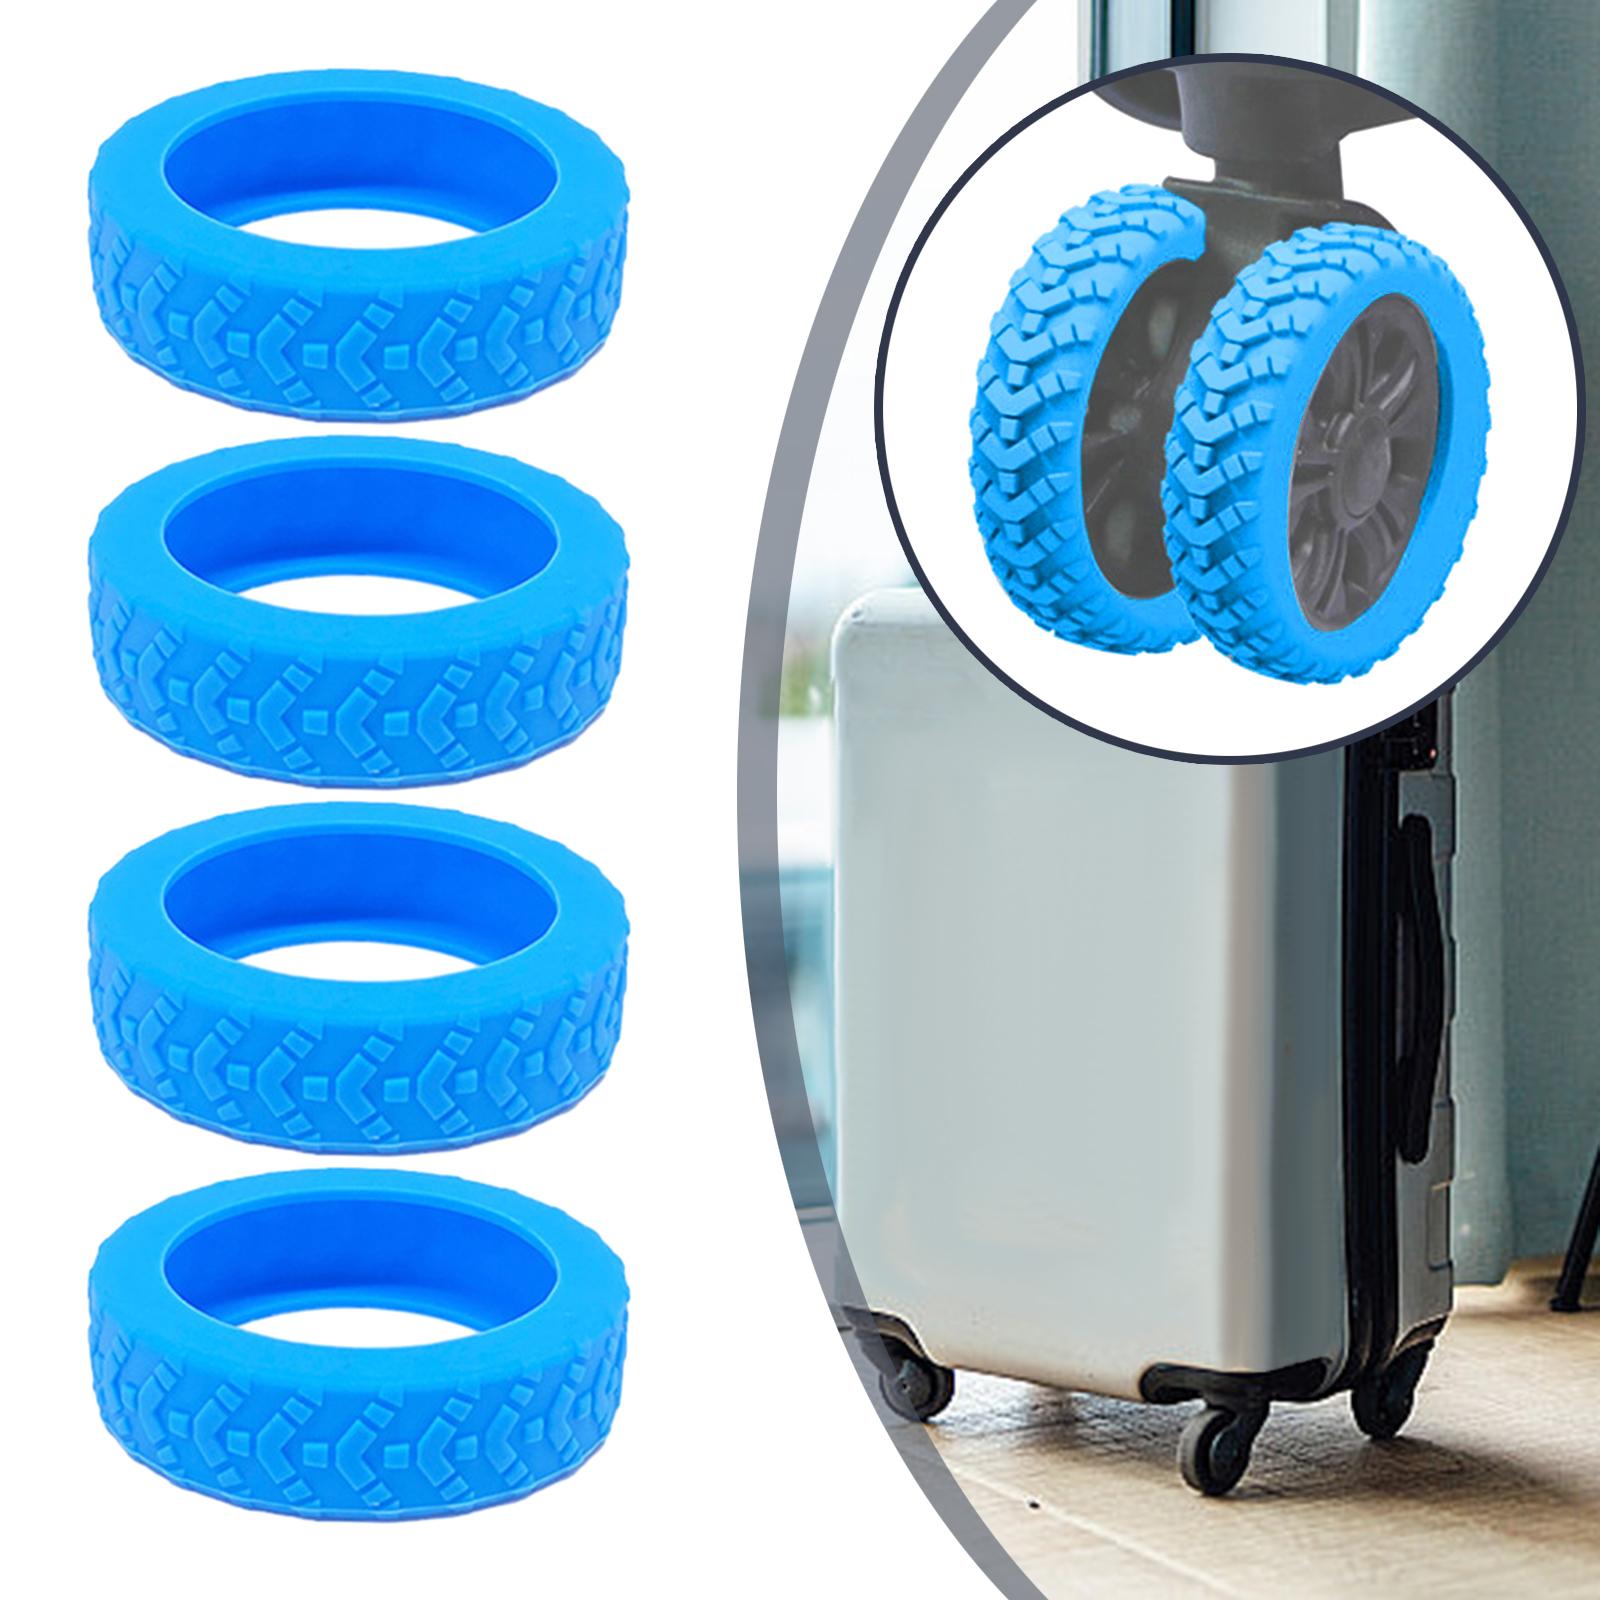 4 Pieces Luggage Wheels Covers Replace Parts Silicone Suitcase Wheels Covers Blue